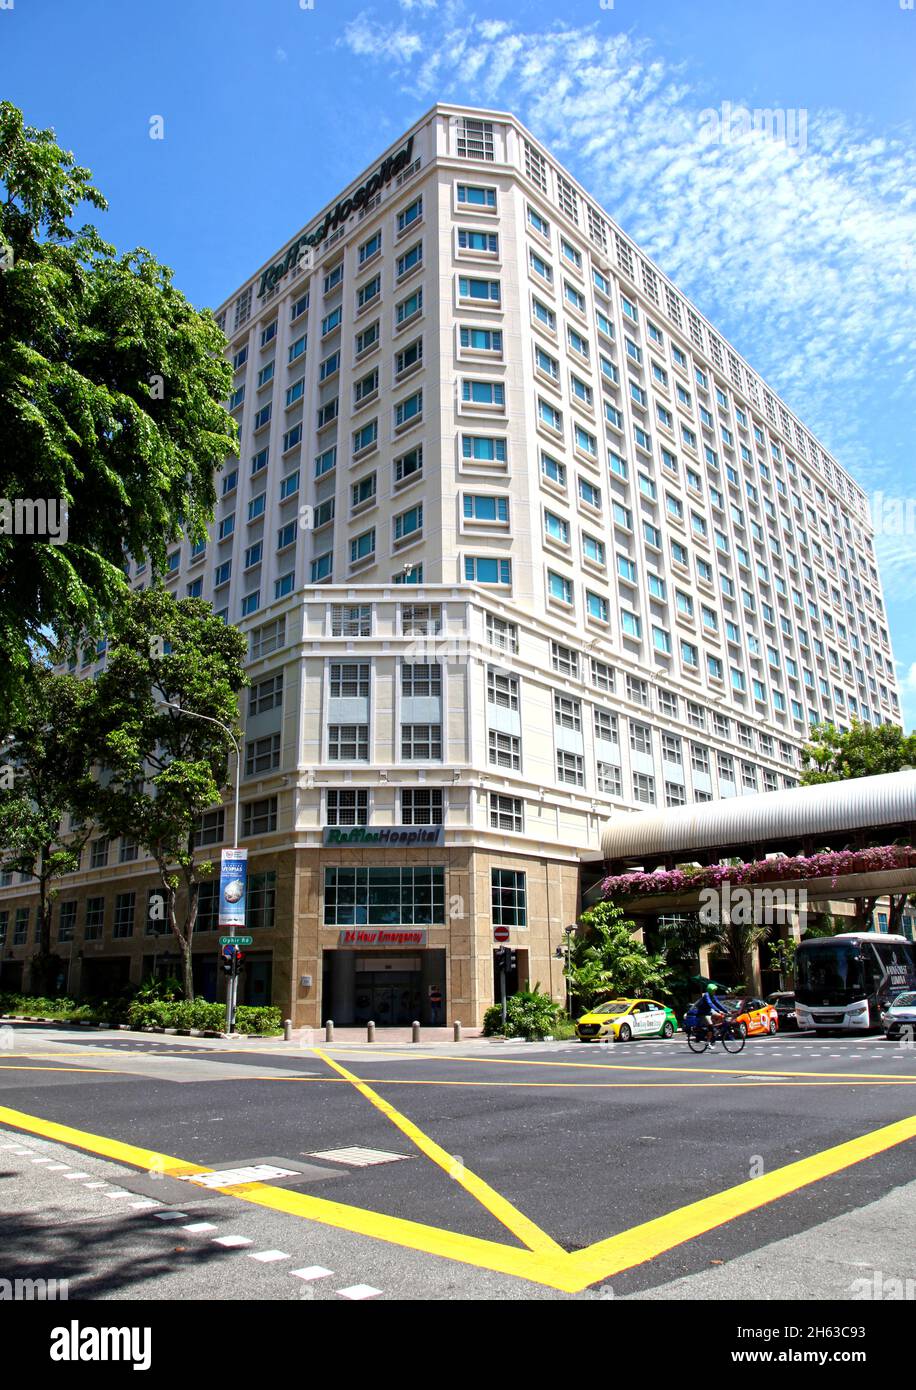 A view looking up at Raffles Hospital in theBugis area of Singapore at the intersection of Ophir Road and North Bridge Road. Stock Photo